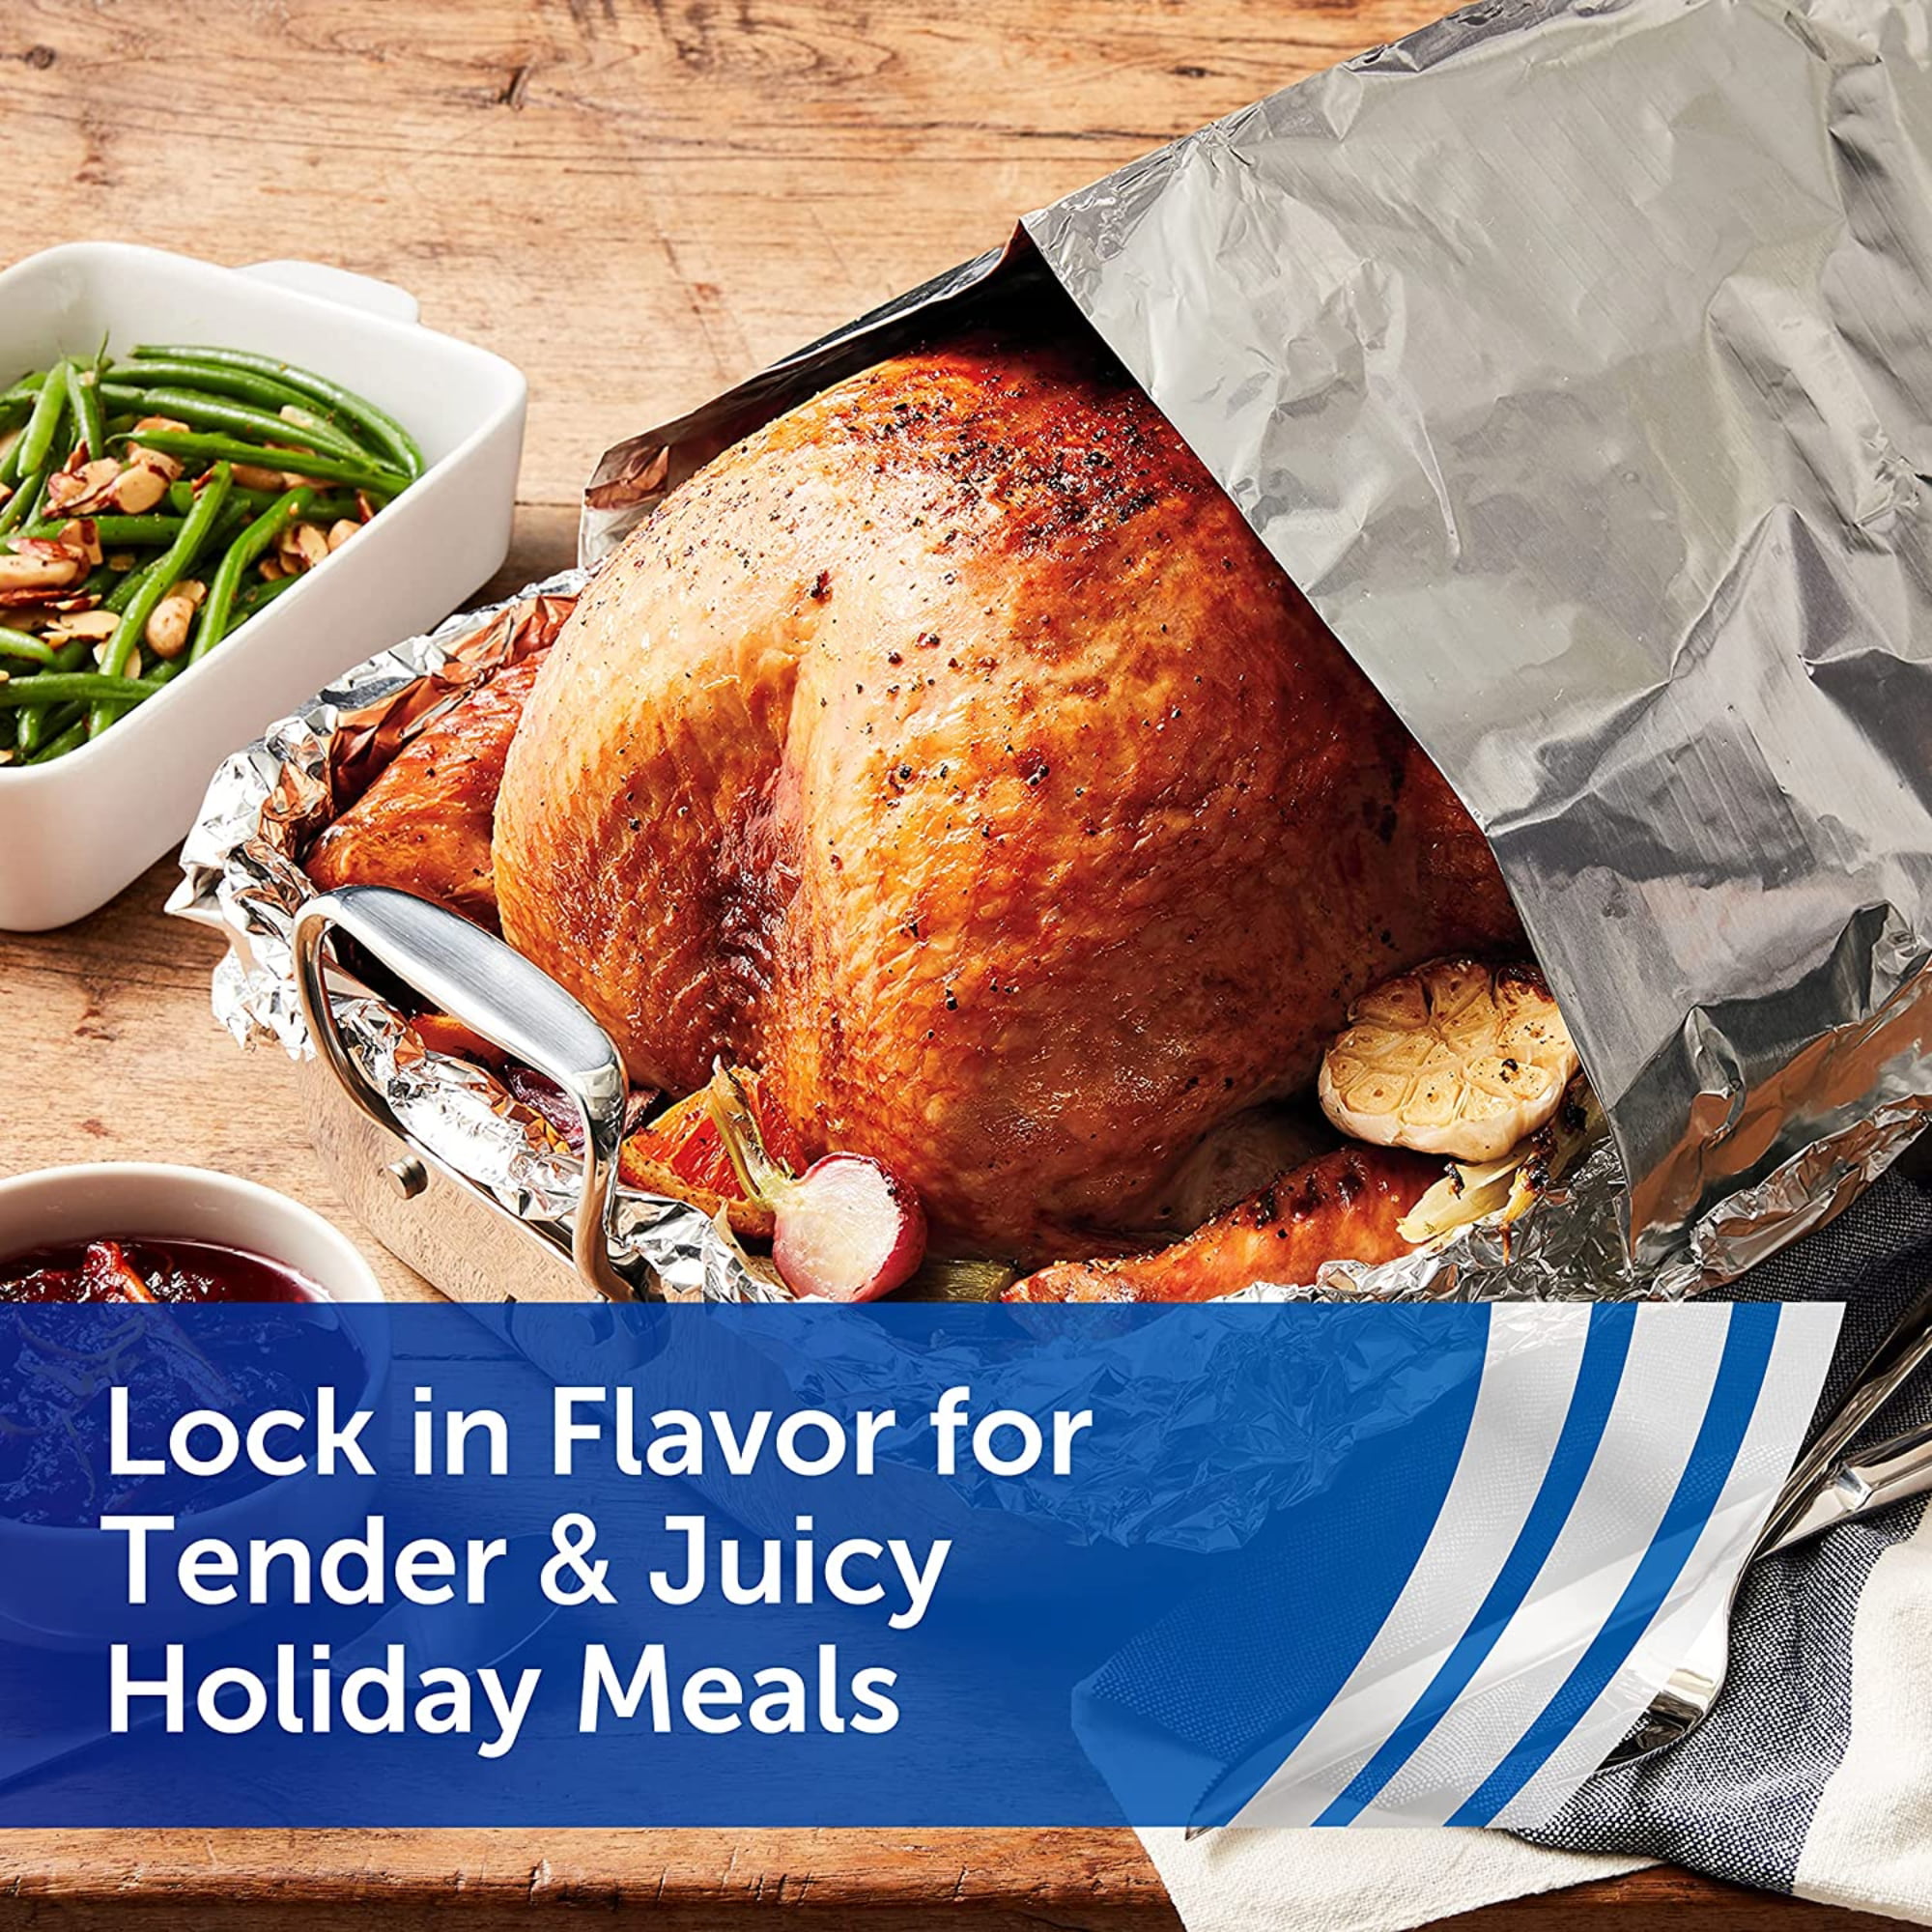 Reynolds Wrap® Aluminum Foil - Use for Every Day for Every Meal! 